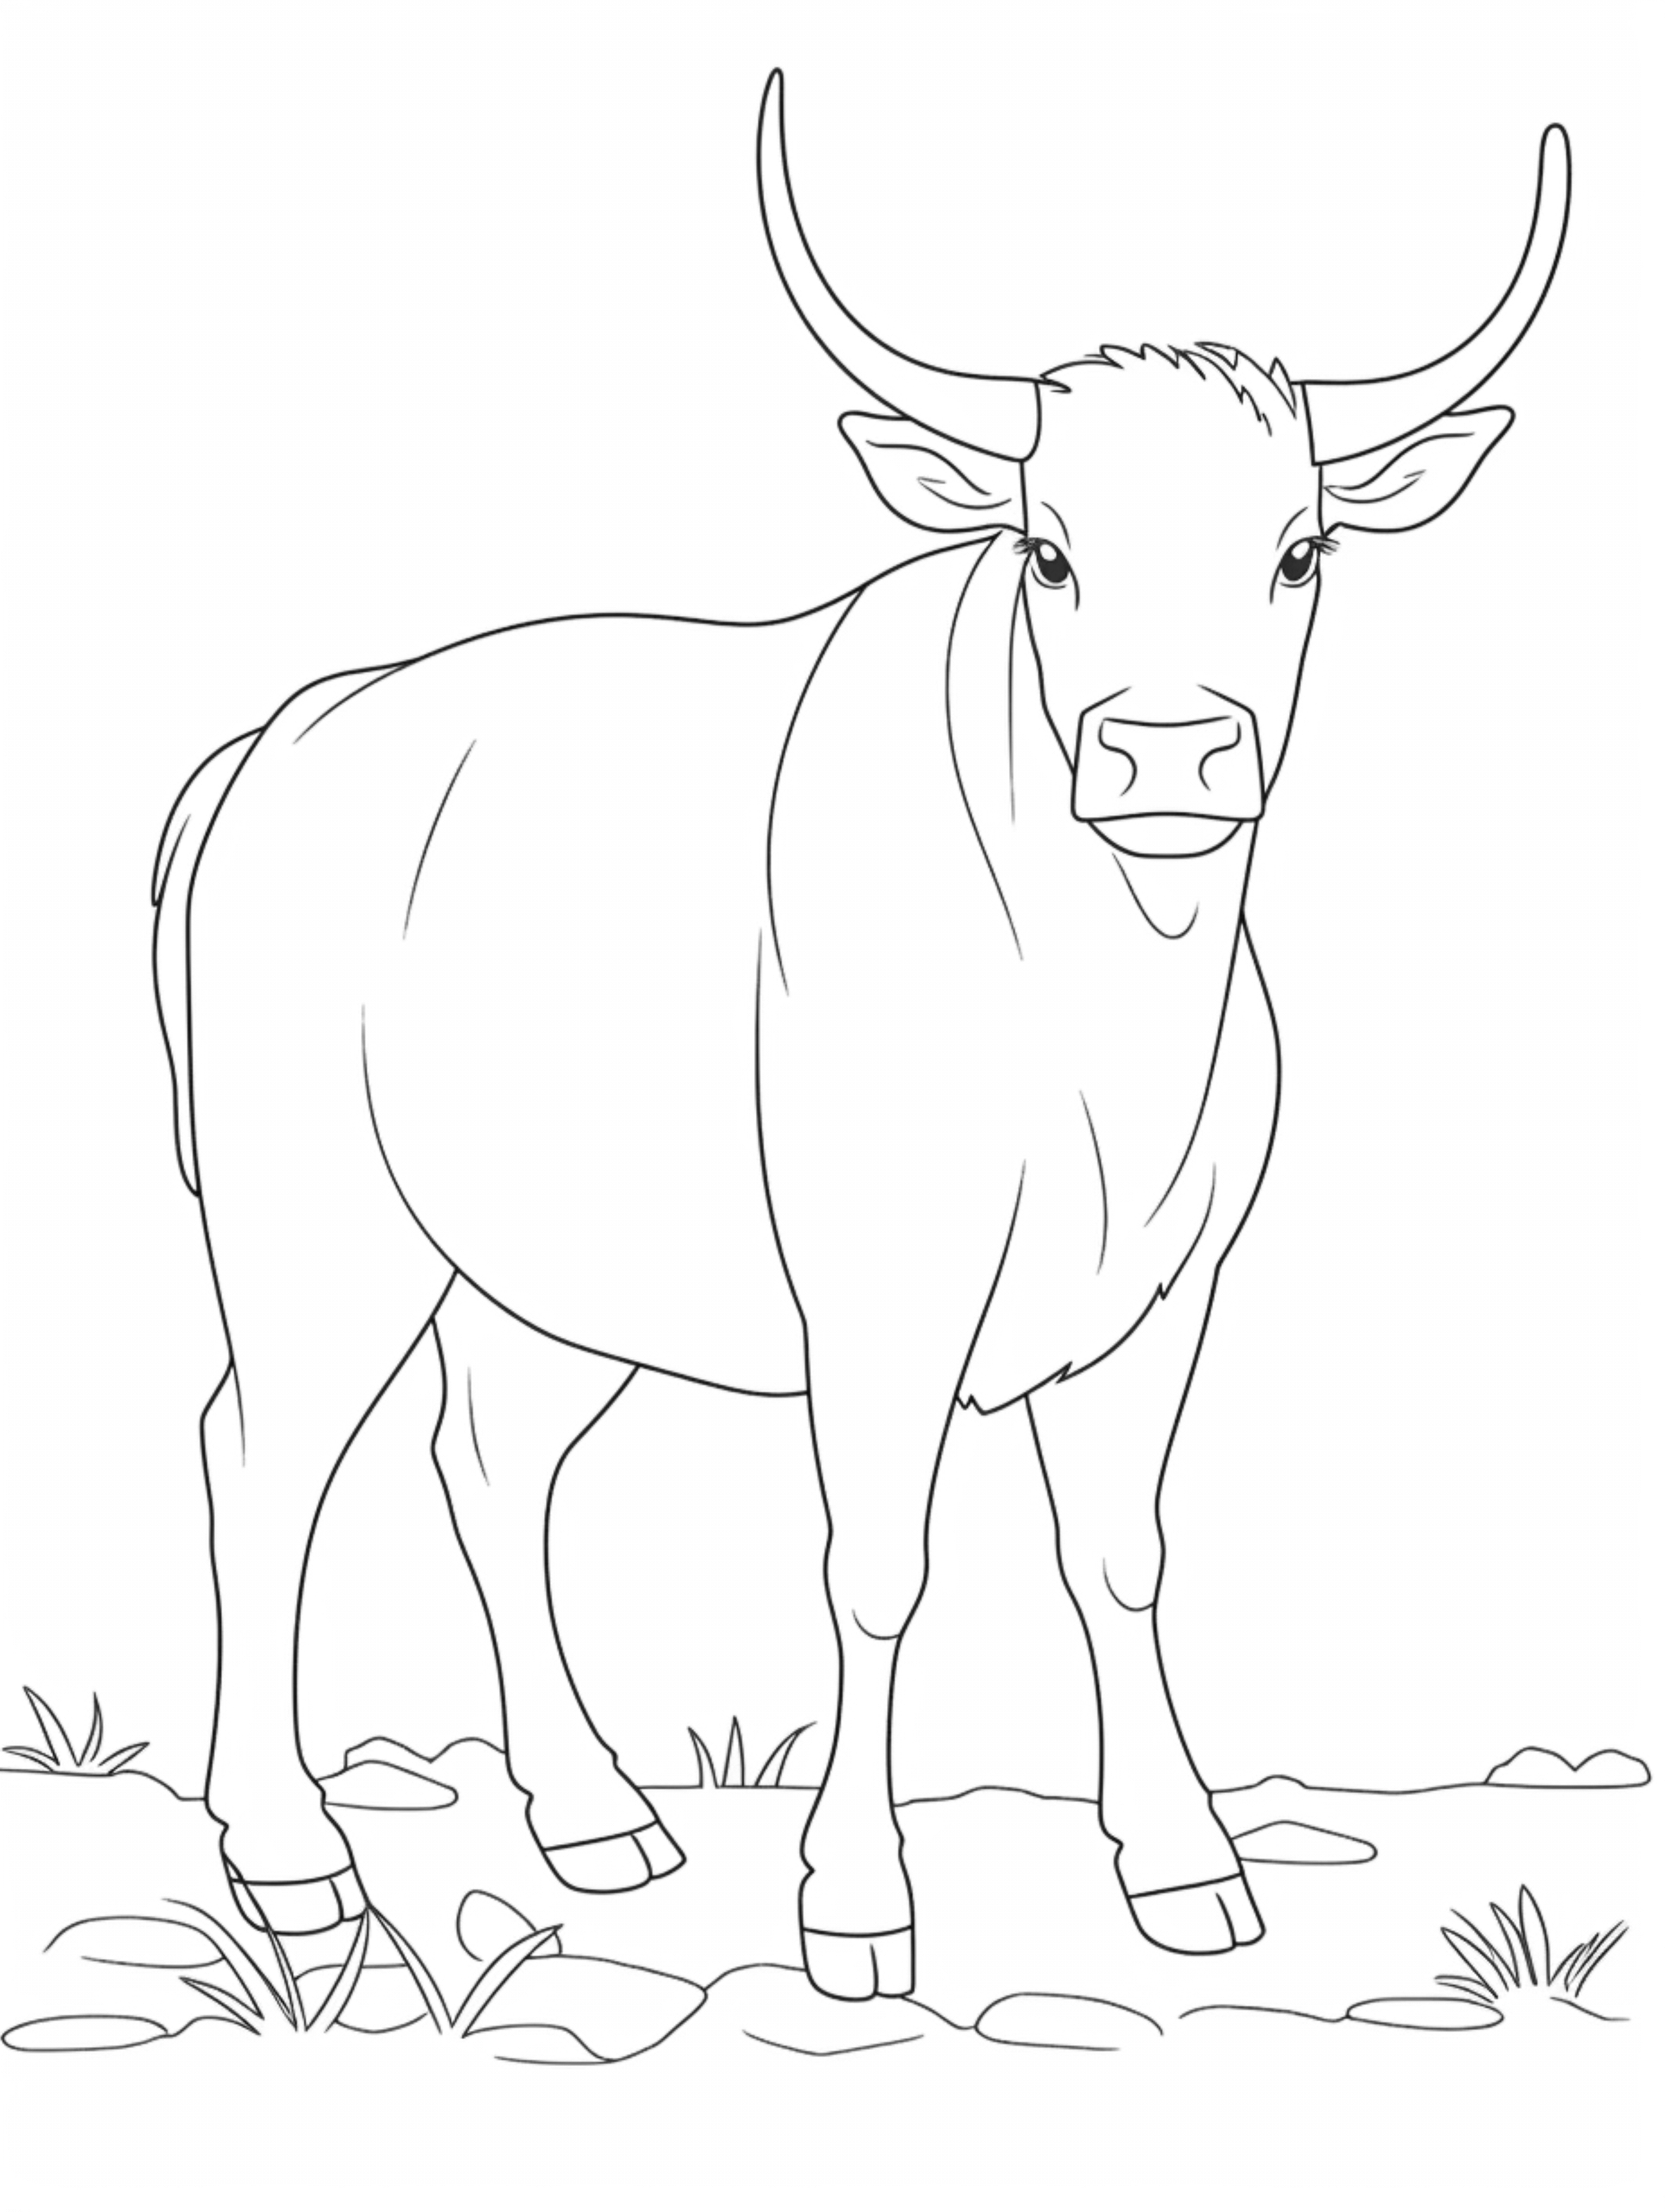 longhorn coloring page